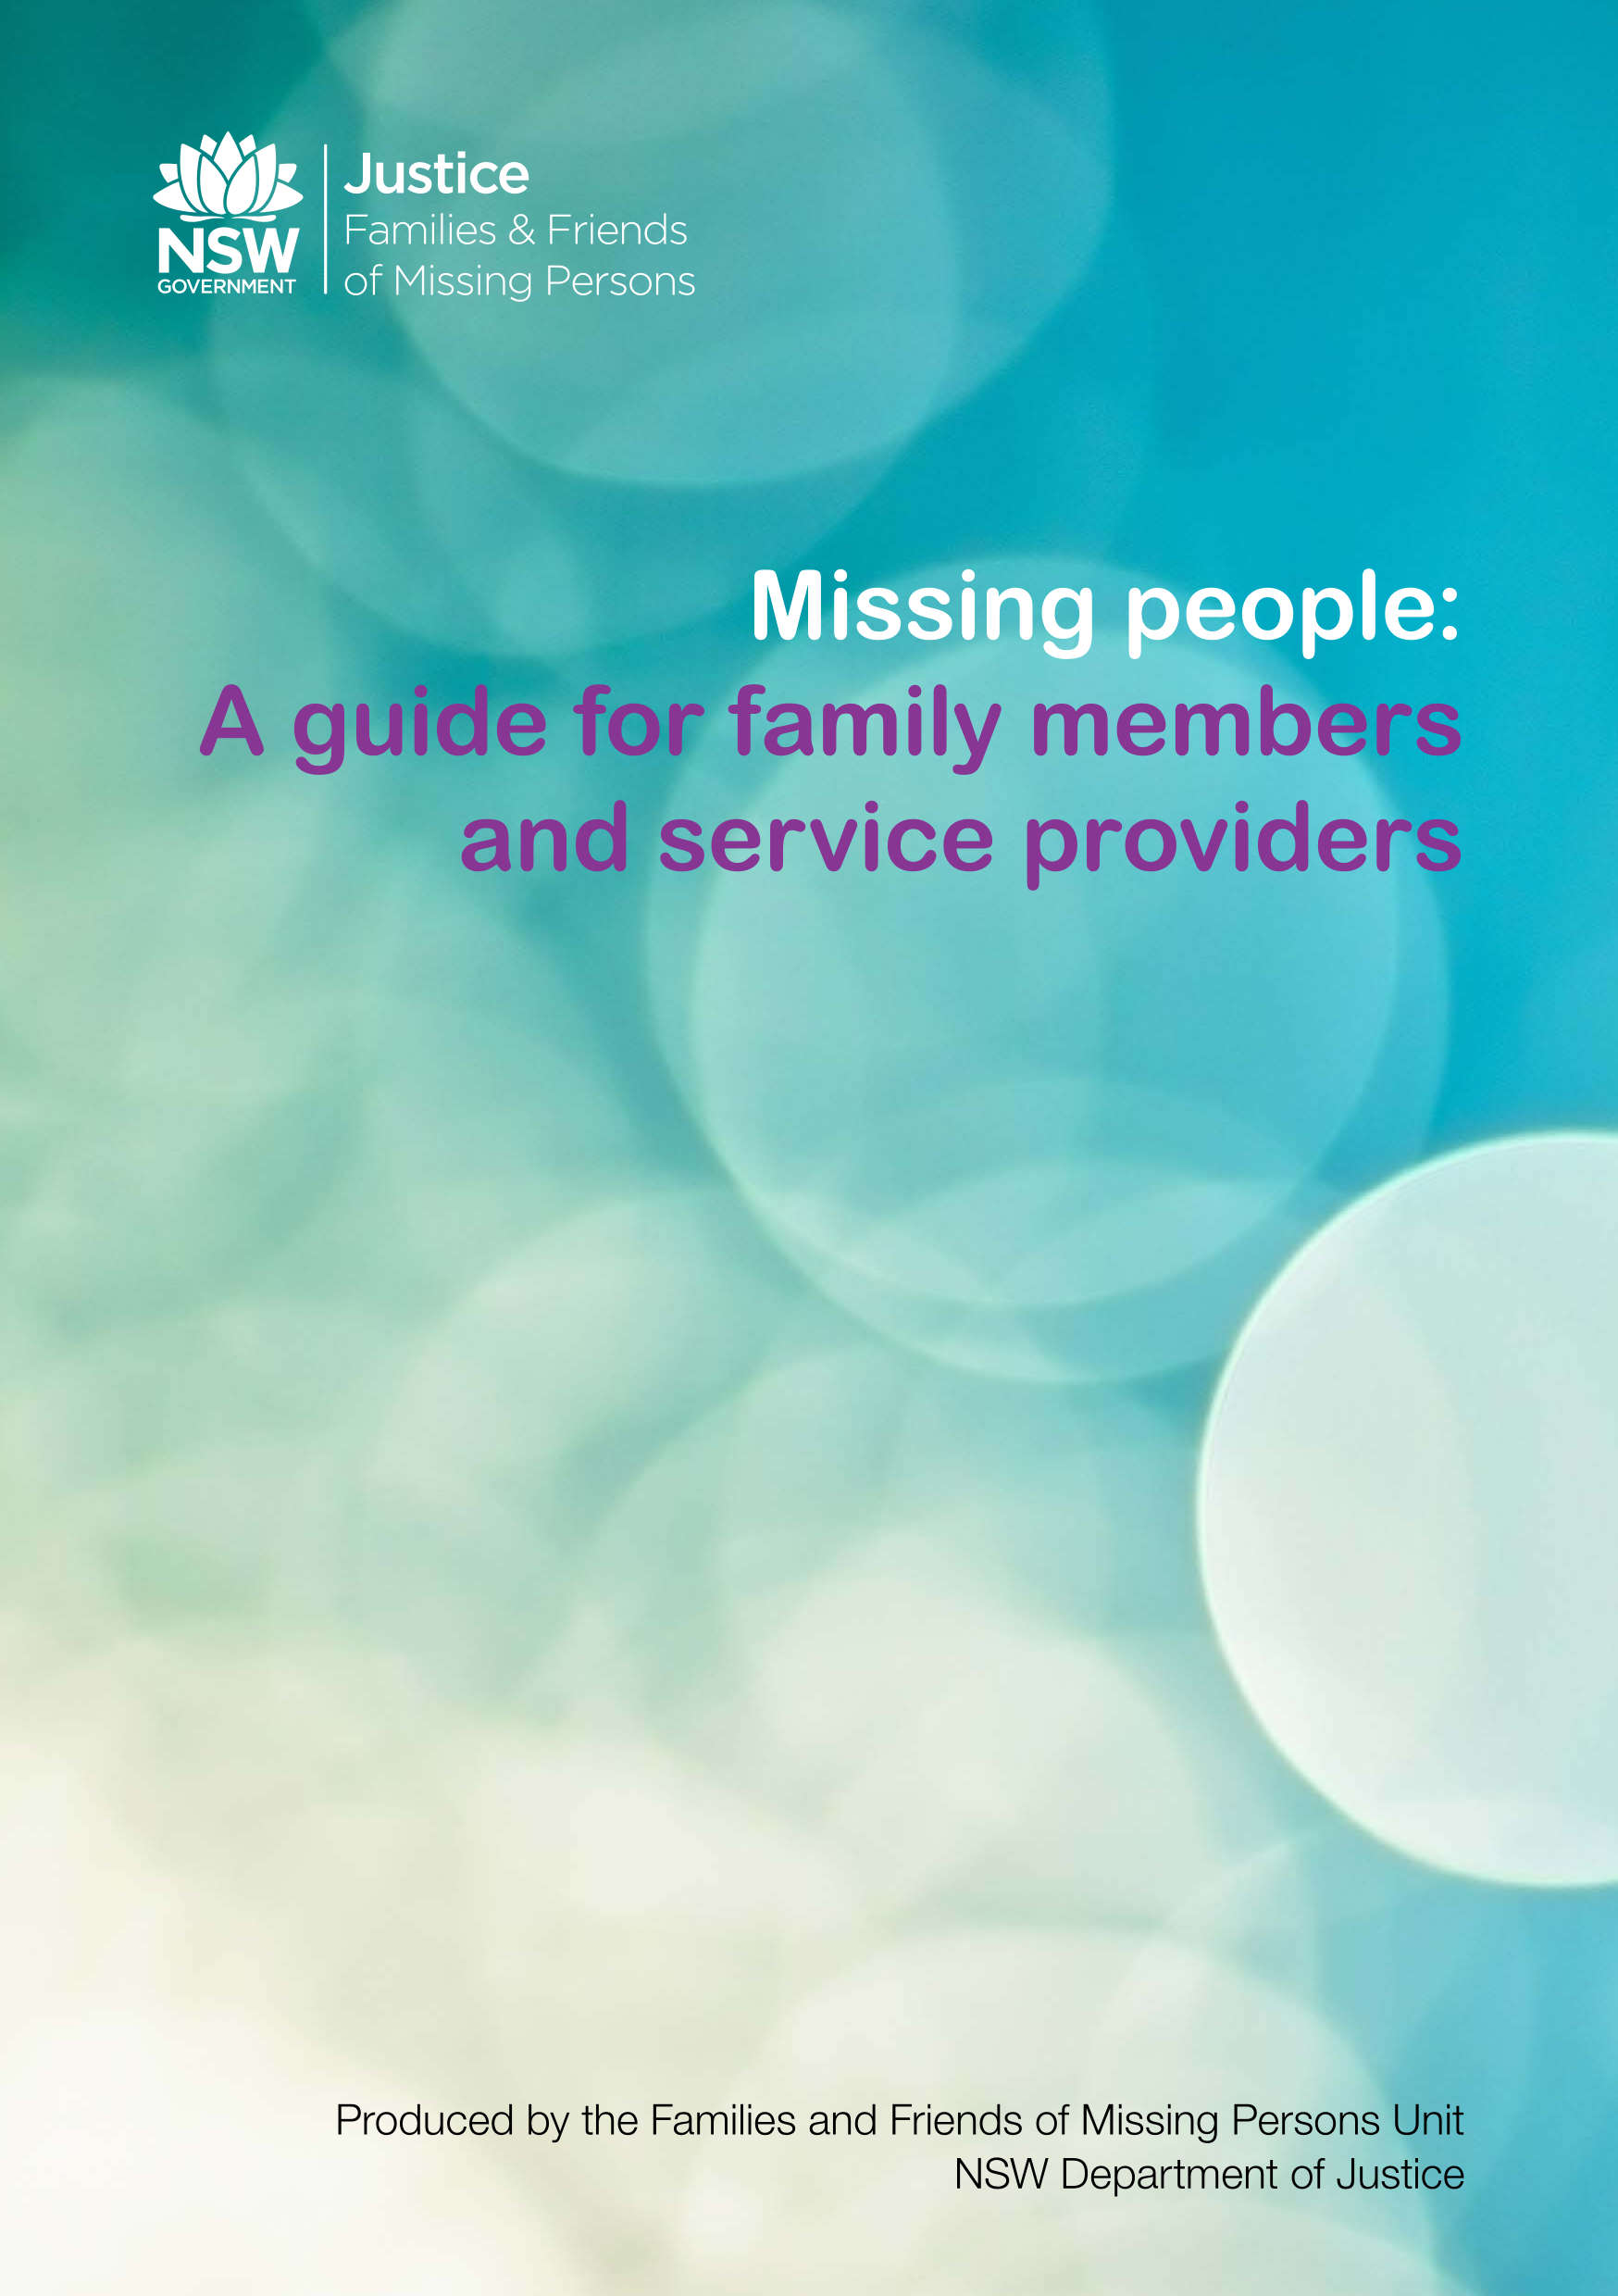 Cover of Missing People a guide for family members and service providers with blue bubbles